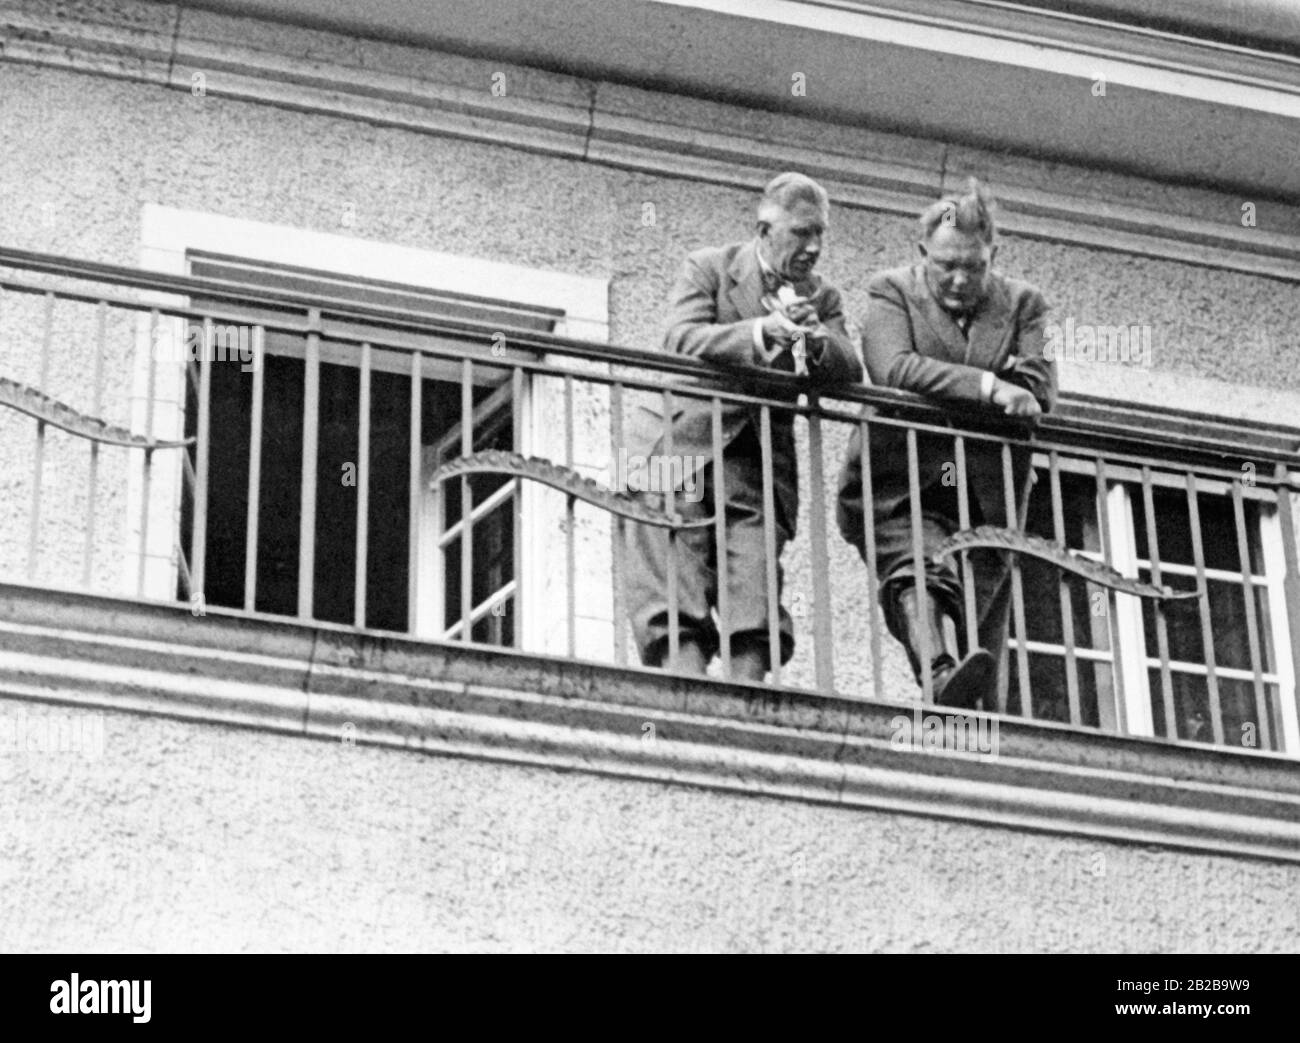 Vice Chancellor Franz von Papen and the Prussian Minister of the Interior Hermann Goering on the balcony of the Neudeck estate at the sickbed of Reich President Paul von Hindenburg. They talk about the succession of the Reich President. Stock Photo